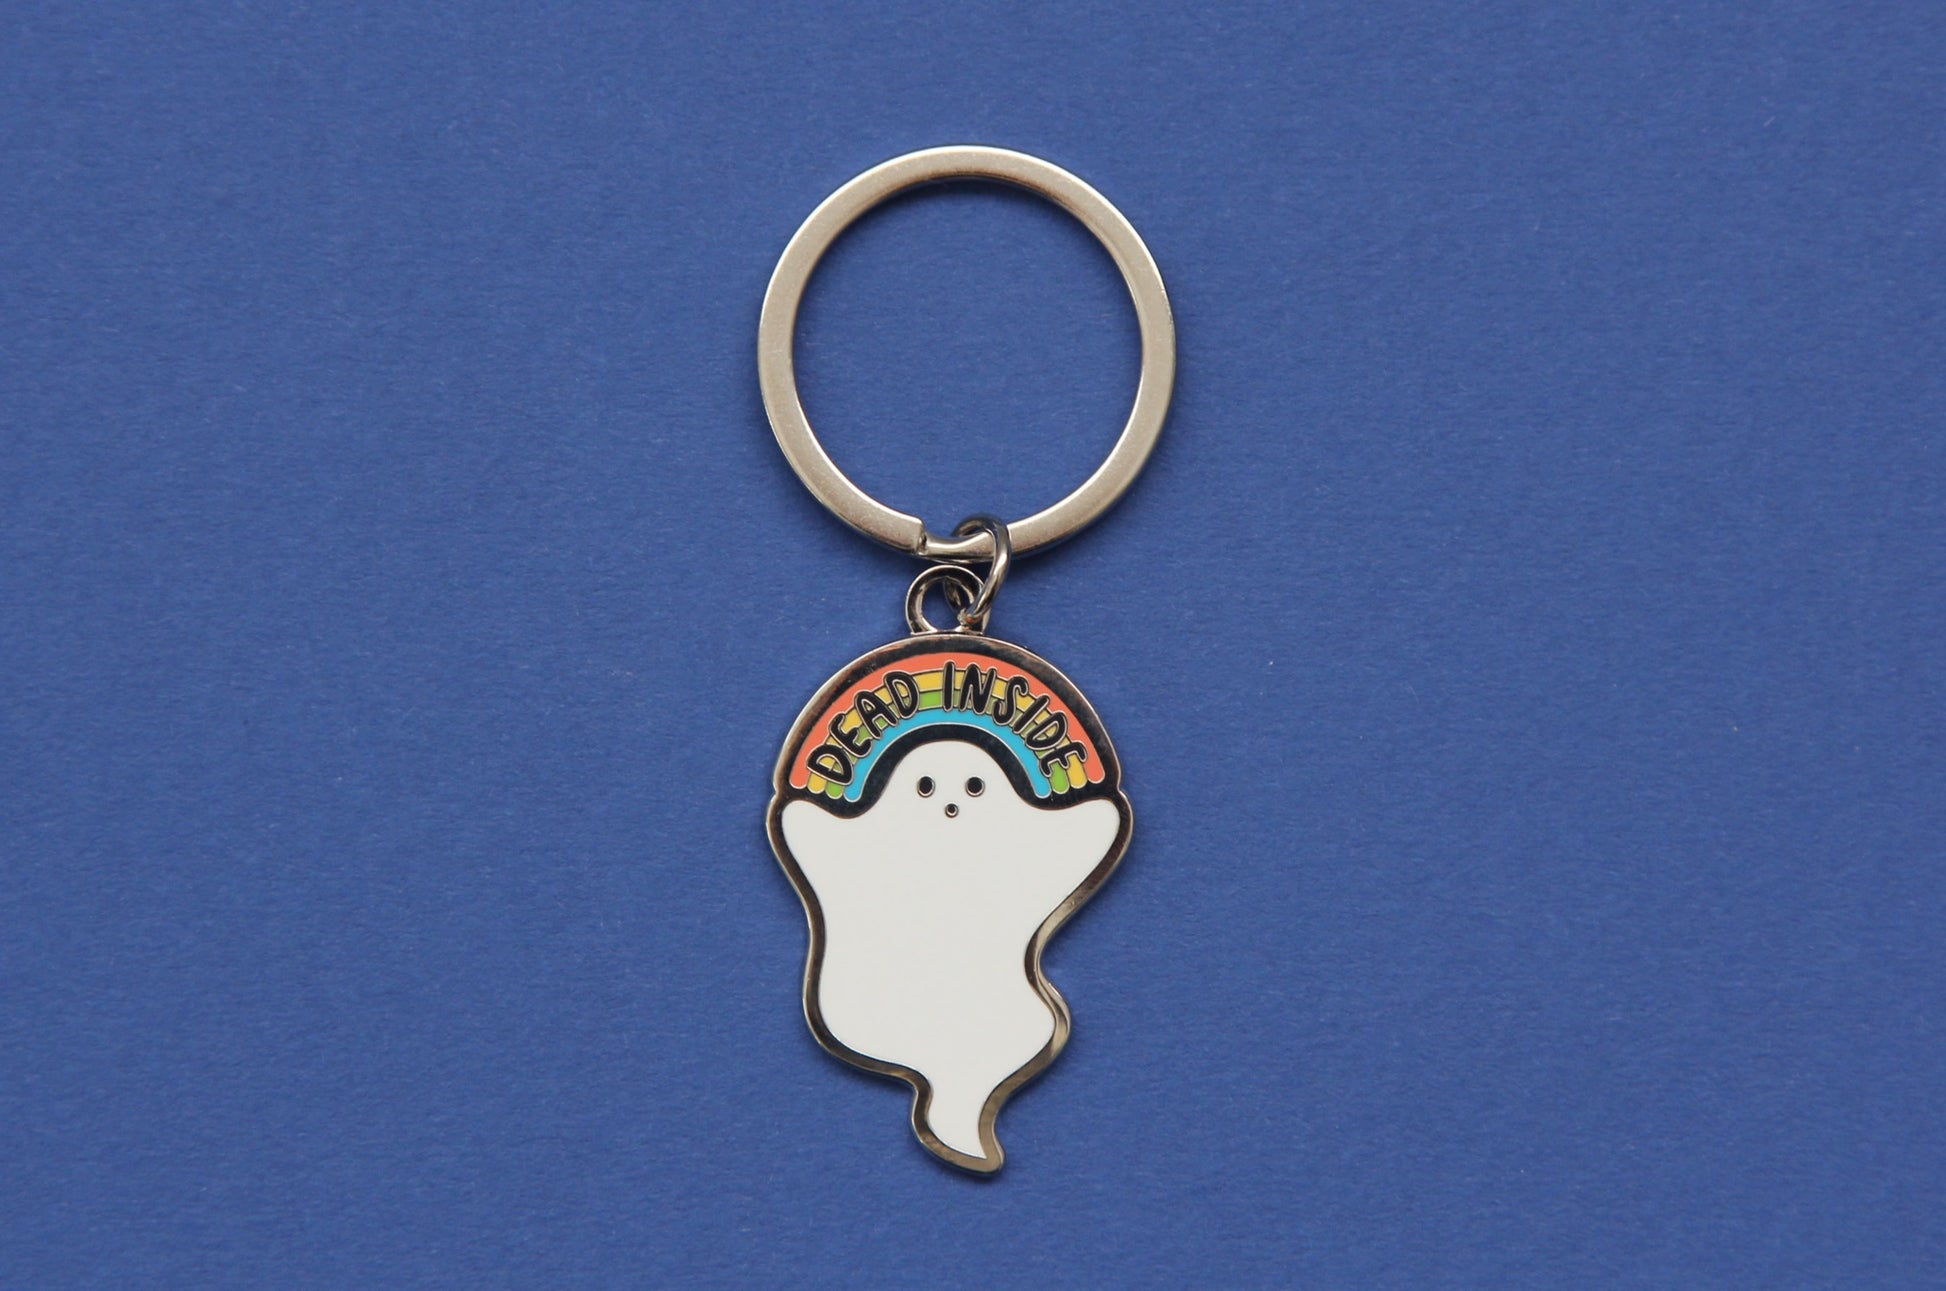 An enamel keychain showing a little white ghost holding a rainbow that says "Dead Inside" over a navy background.